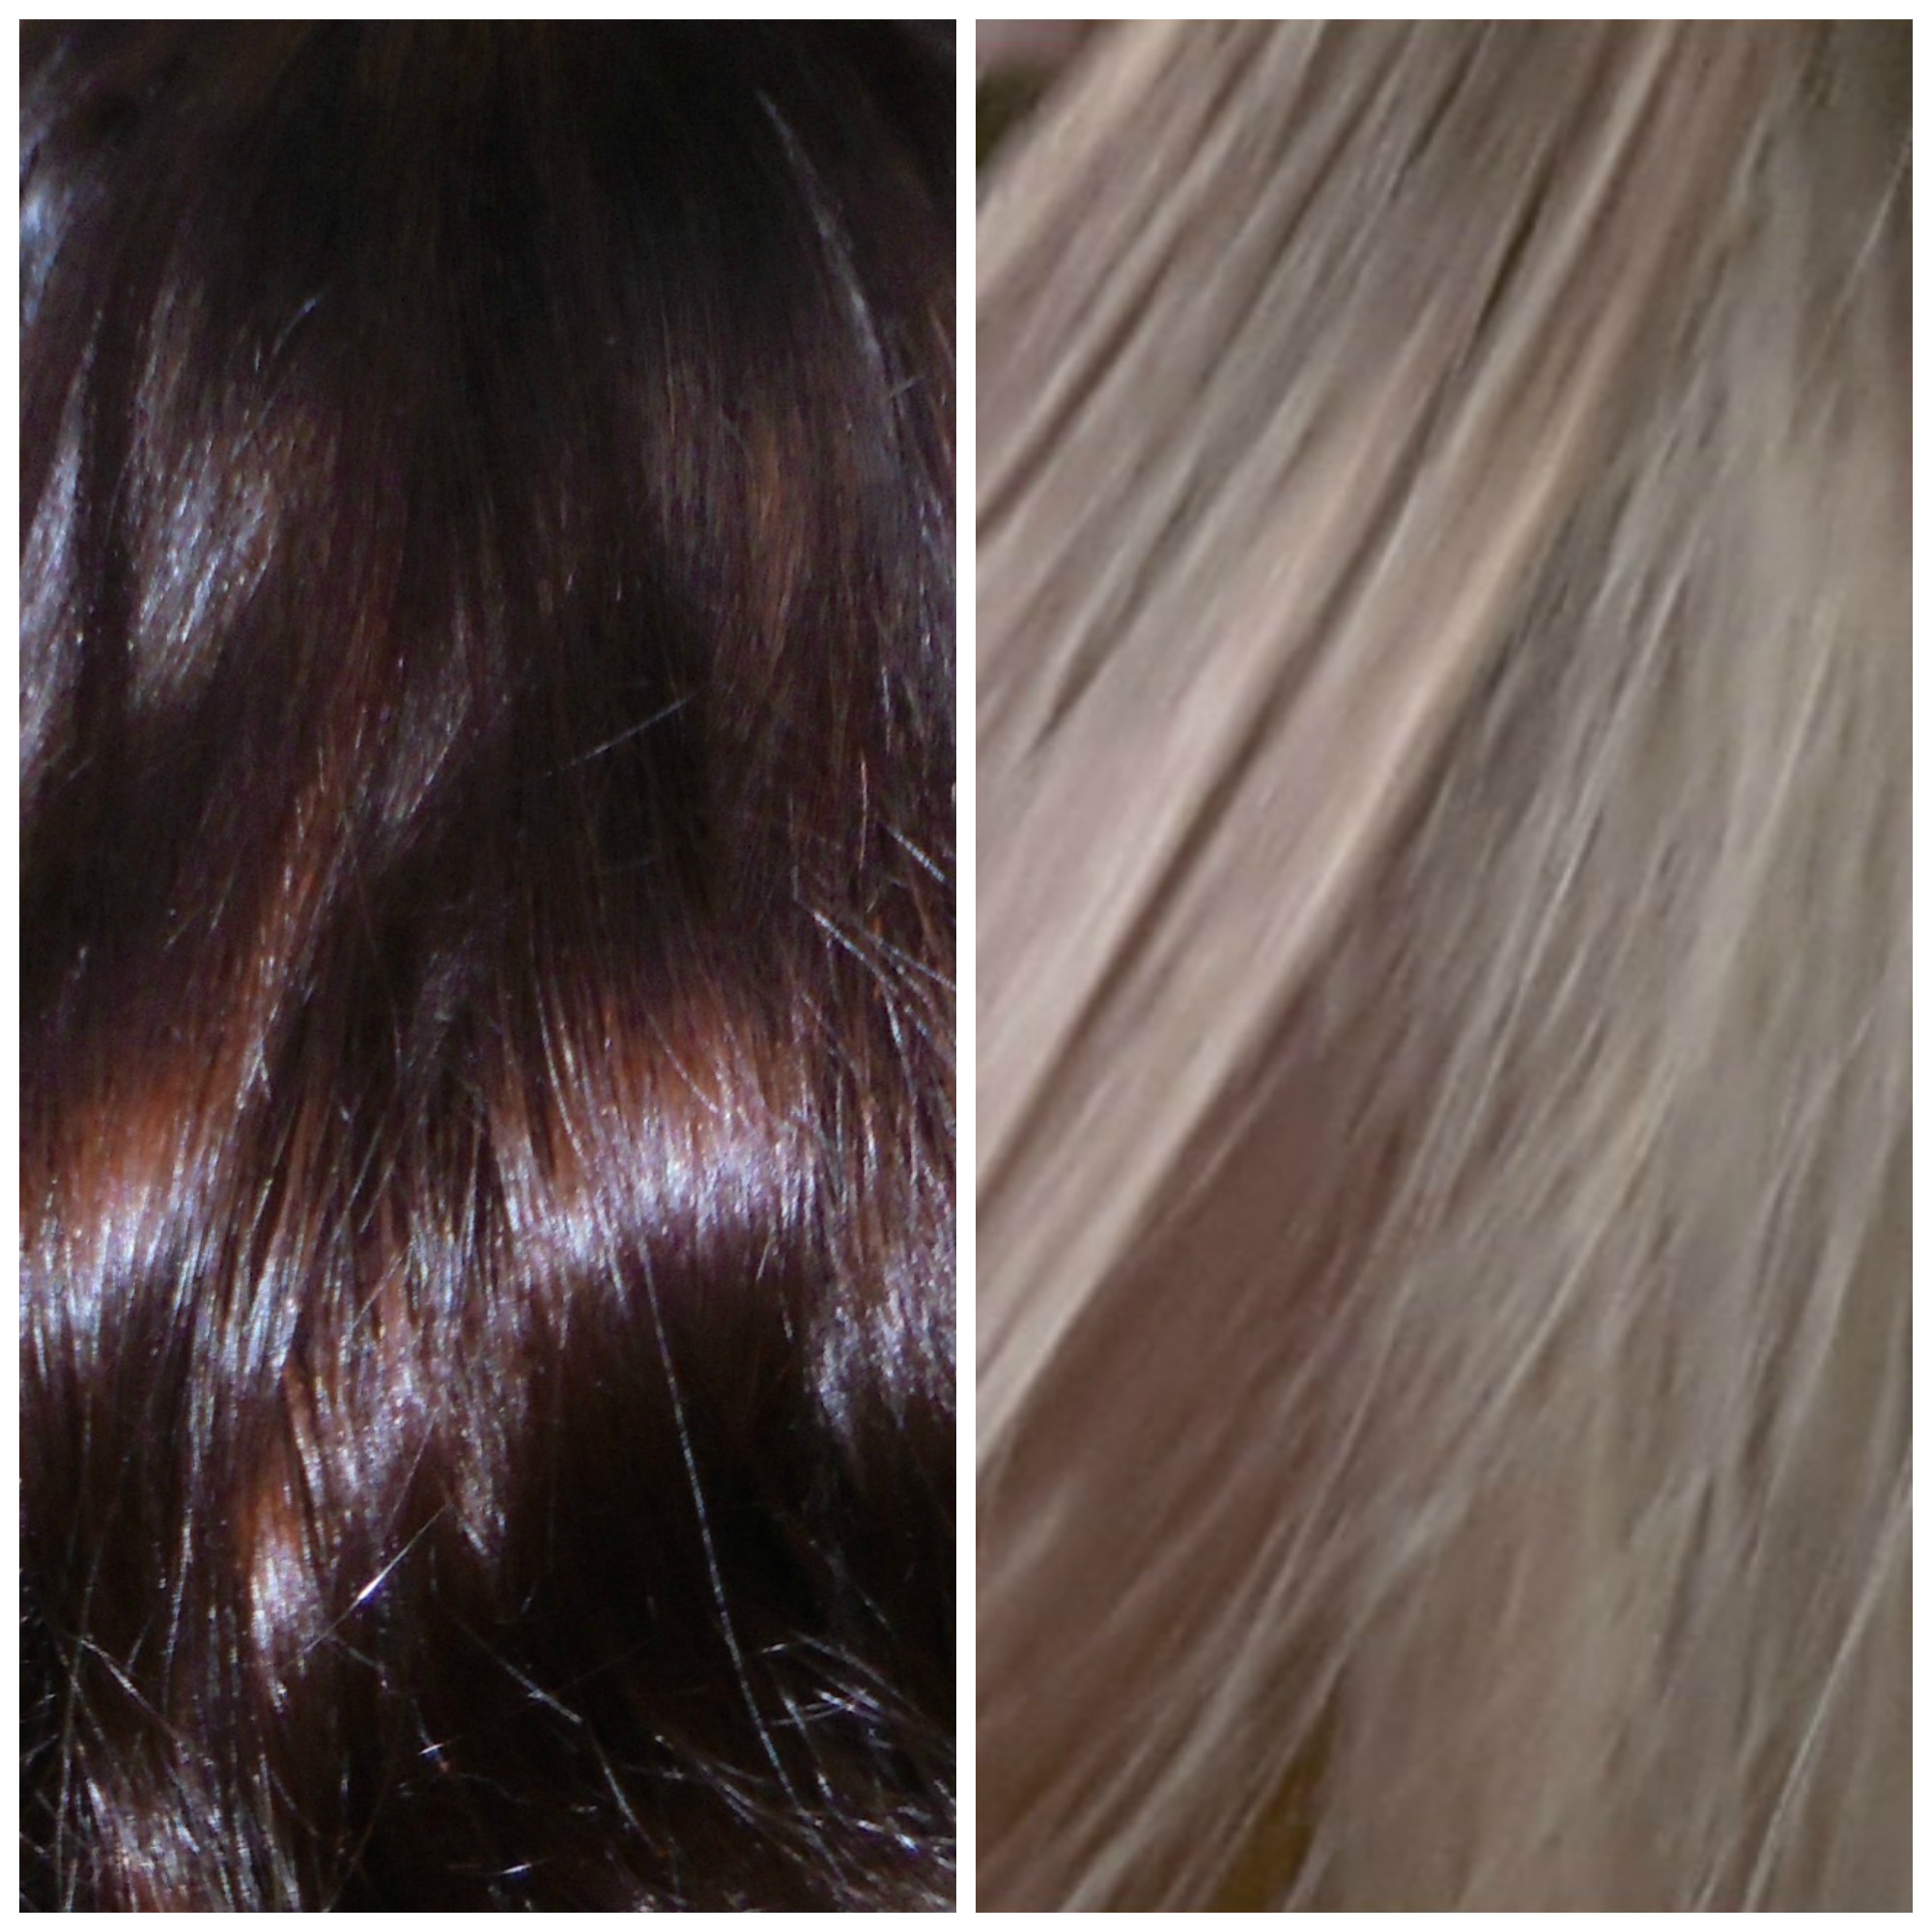 How To Get Lighter Hair At Home Without Damaging It Beauty Review